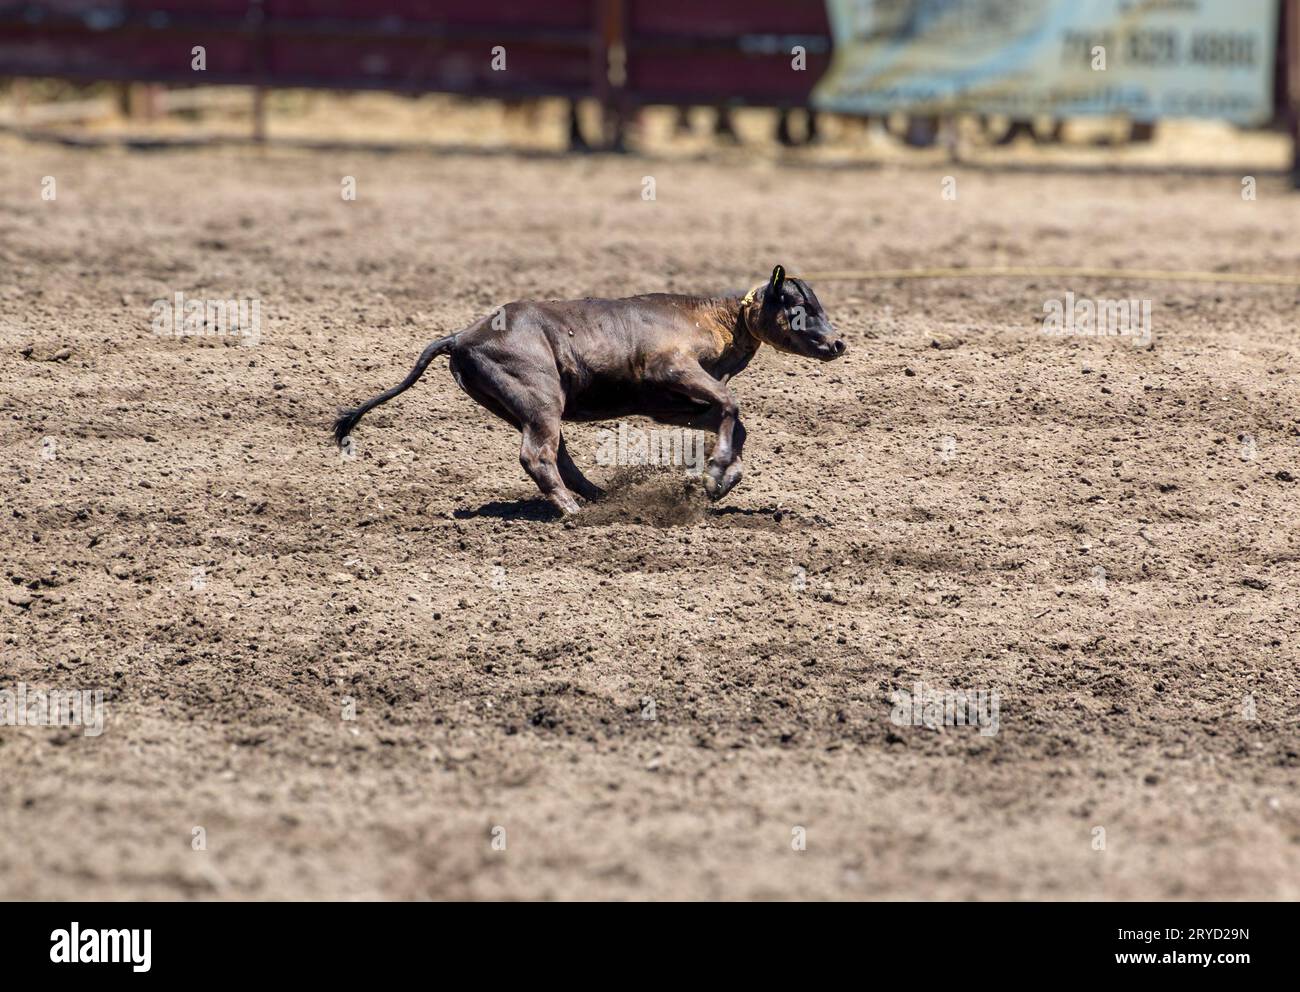 A calf is being lassoed and is pulling away on the rope. it is at a rodeo during a Break Away competition. The calf is brown and is kicking up dirt in Stock Photo